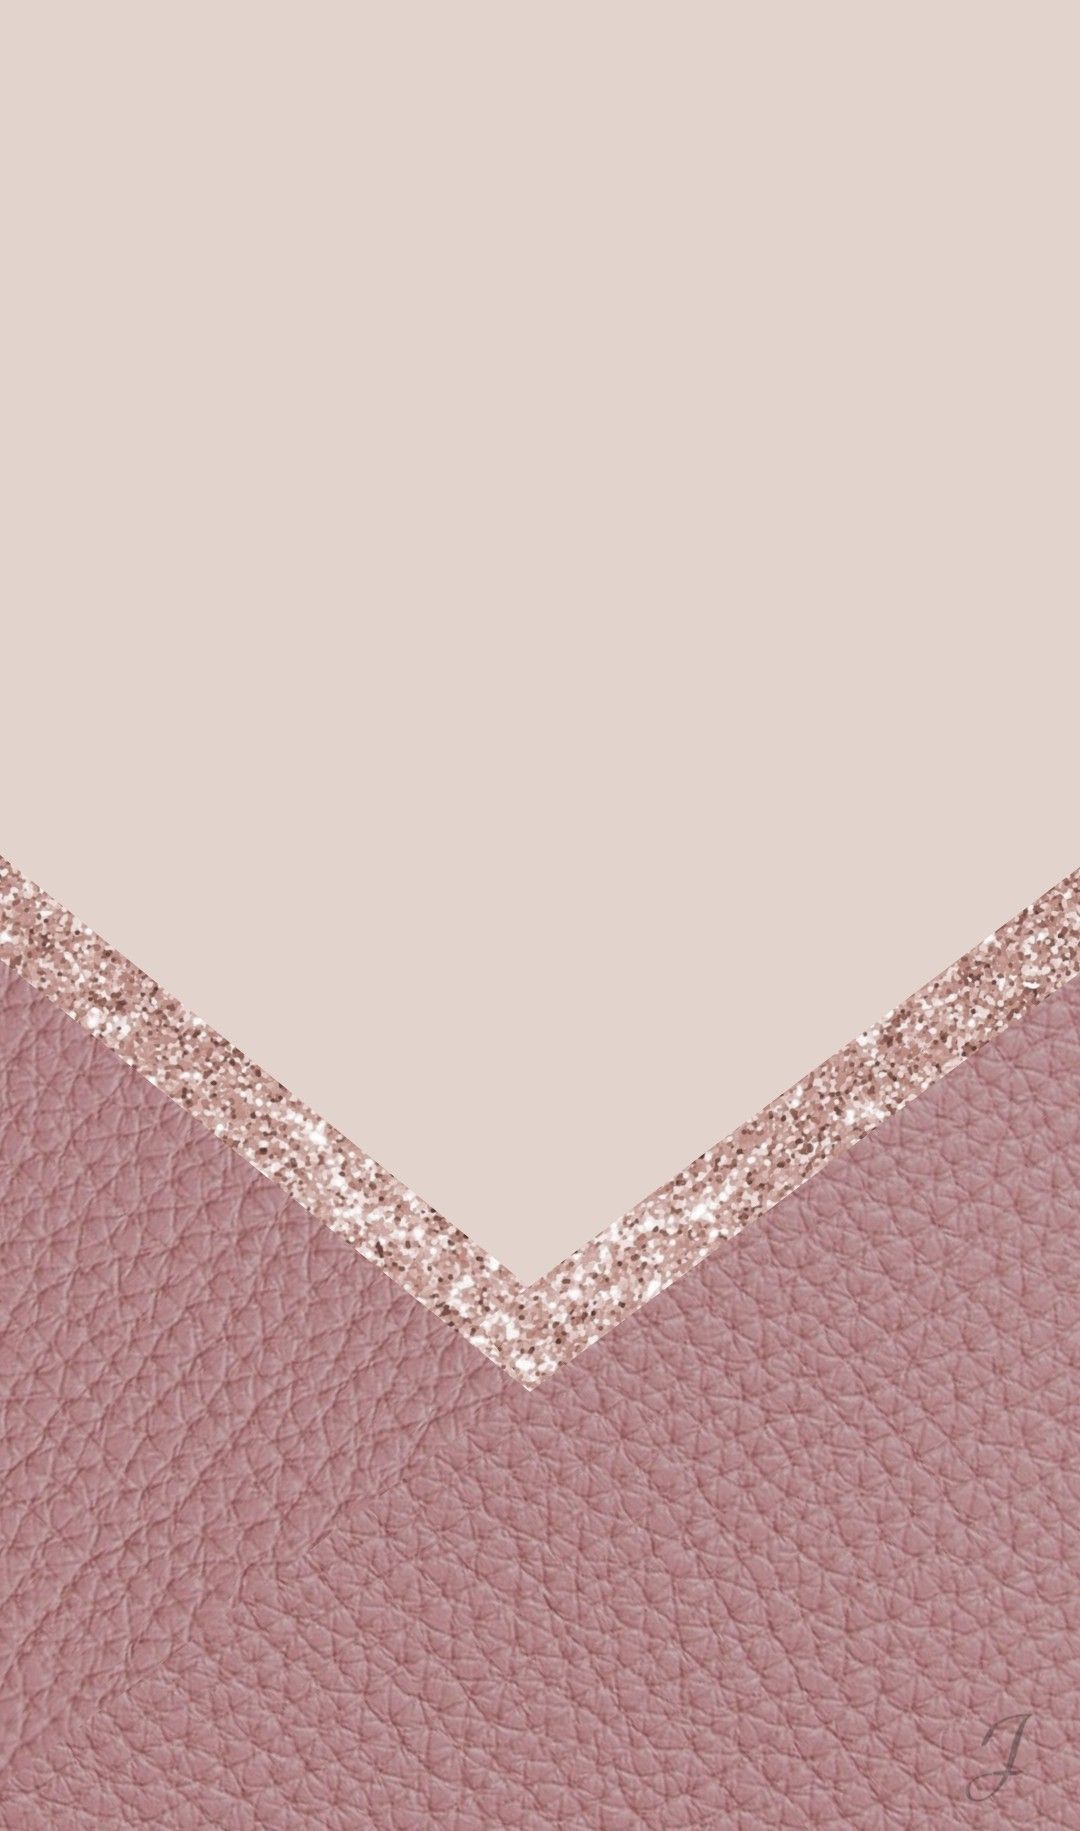 Beige, rose gold glitter and pink leather. Pink wallpaper iphone, Glitter phone wallpaper, iPhone wallpaper image